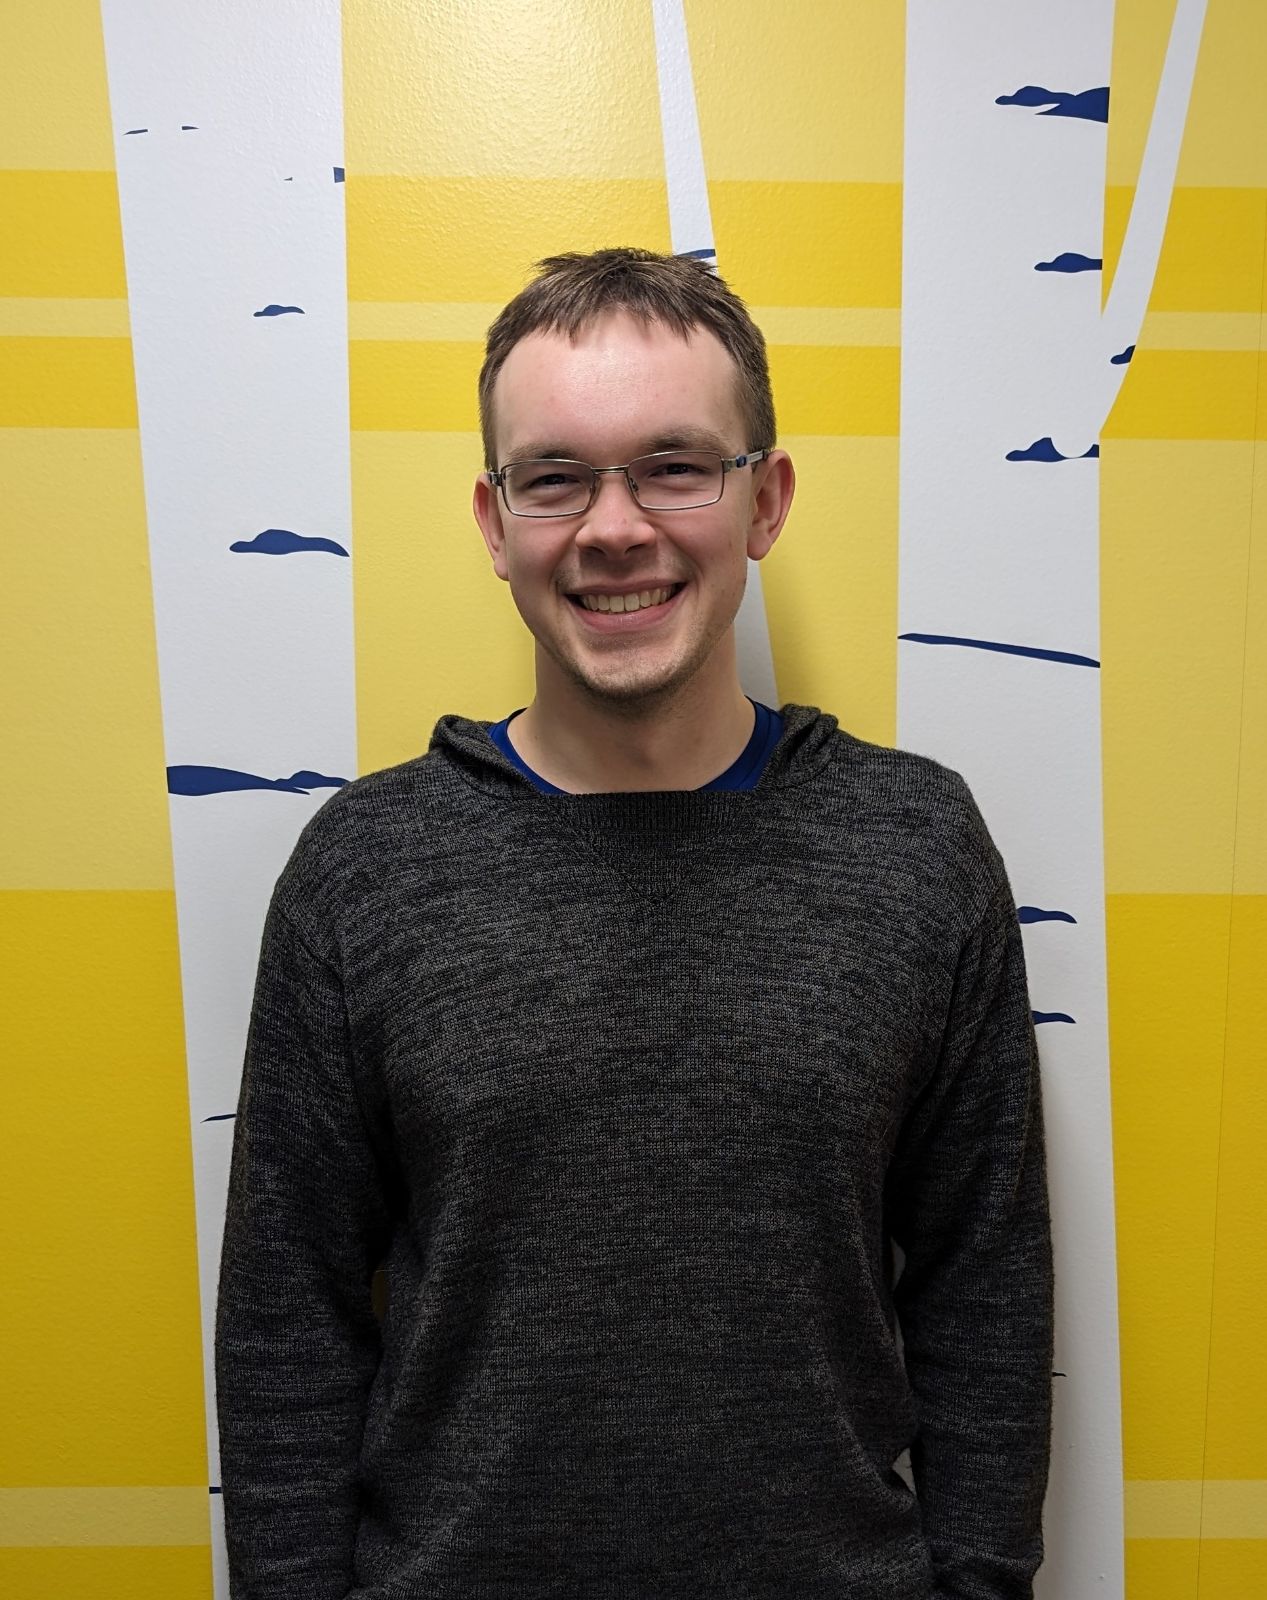 Josef Maier standing in front of a yellow/white background.